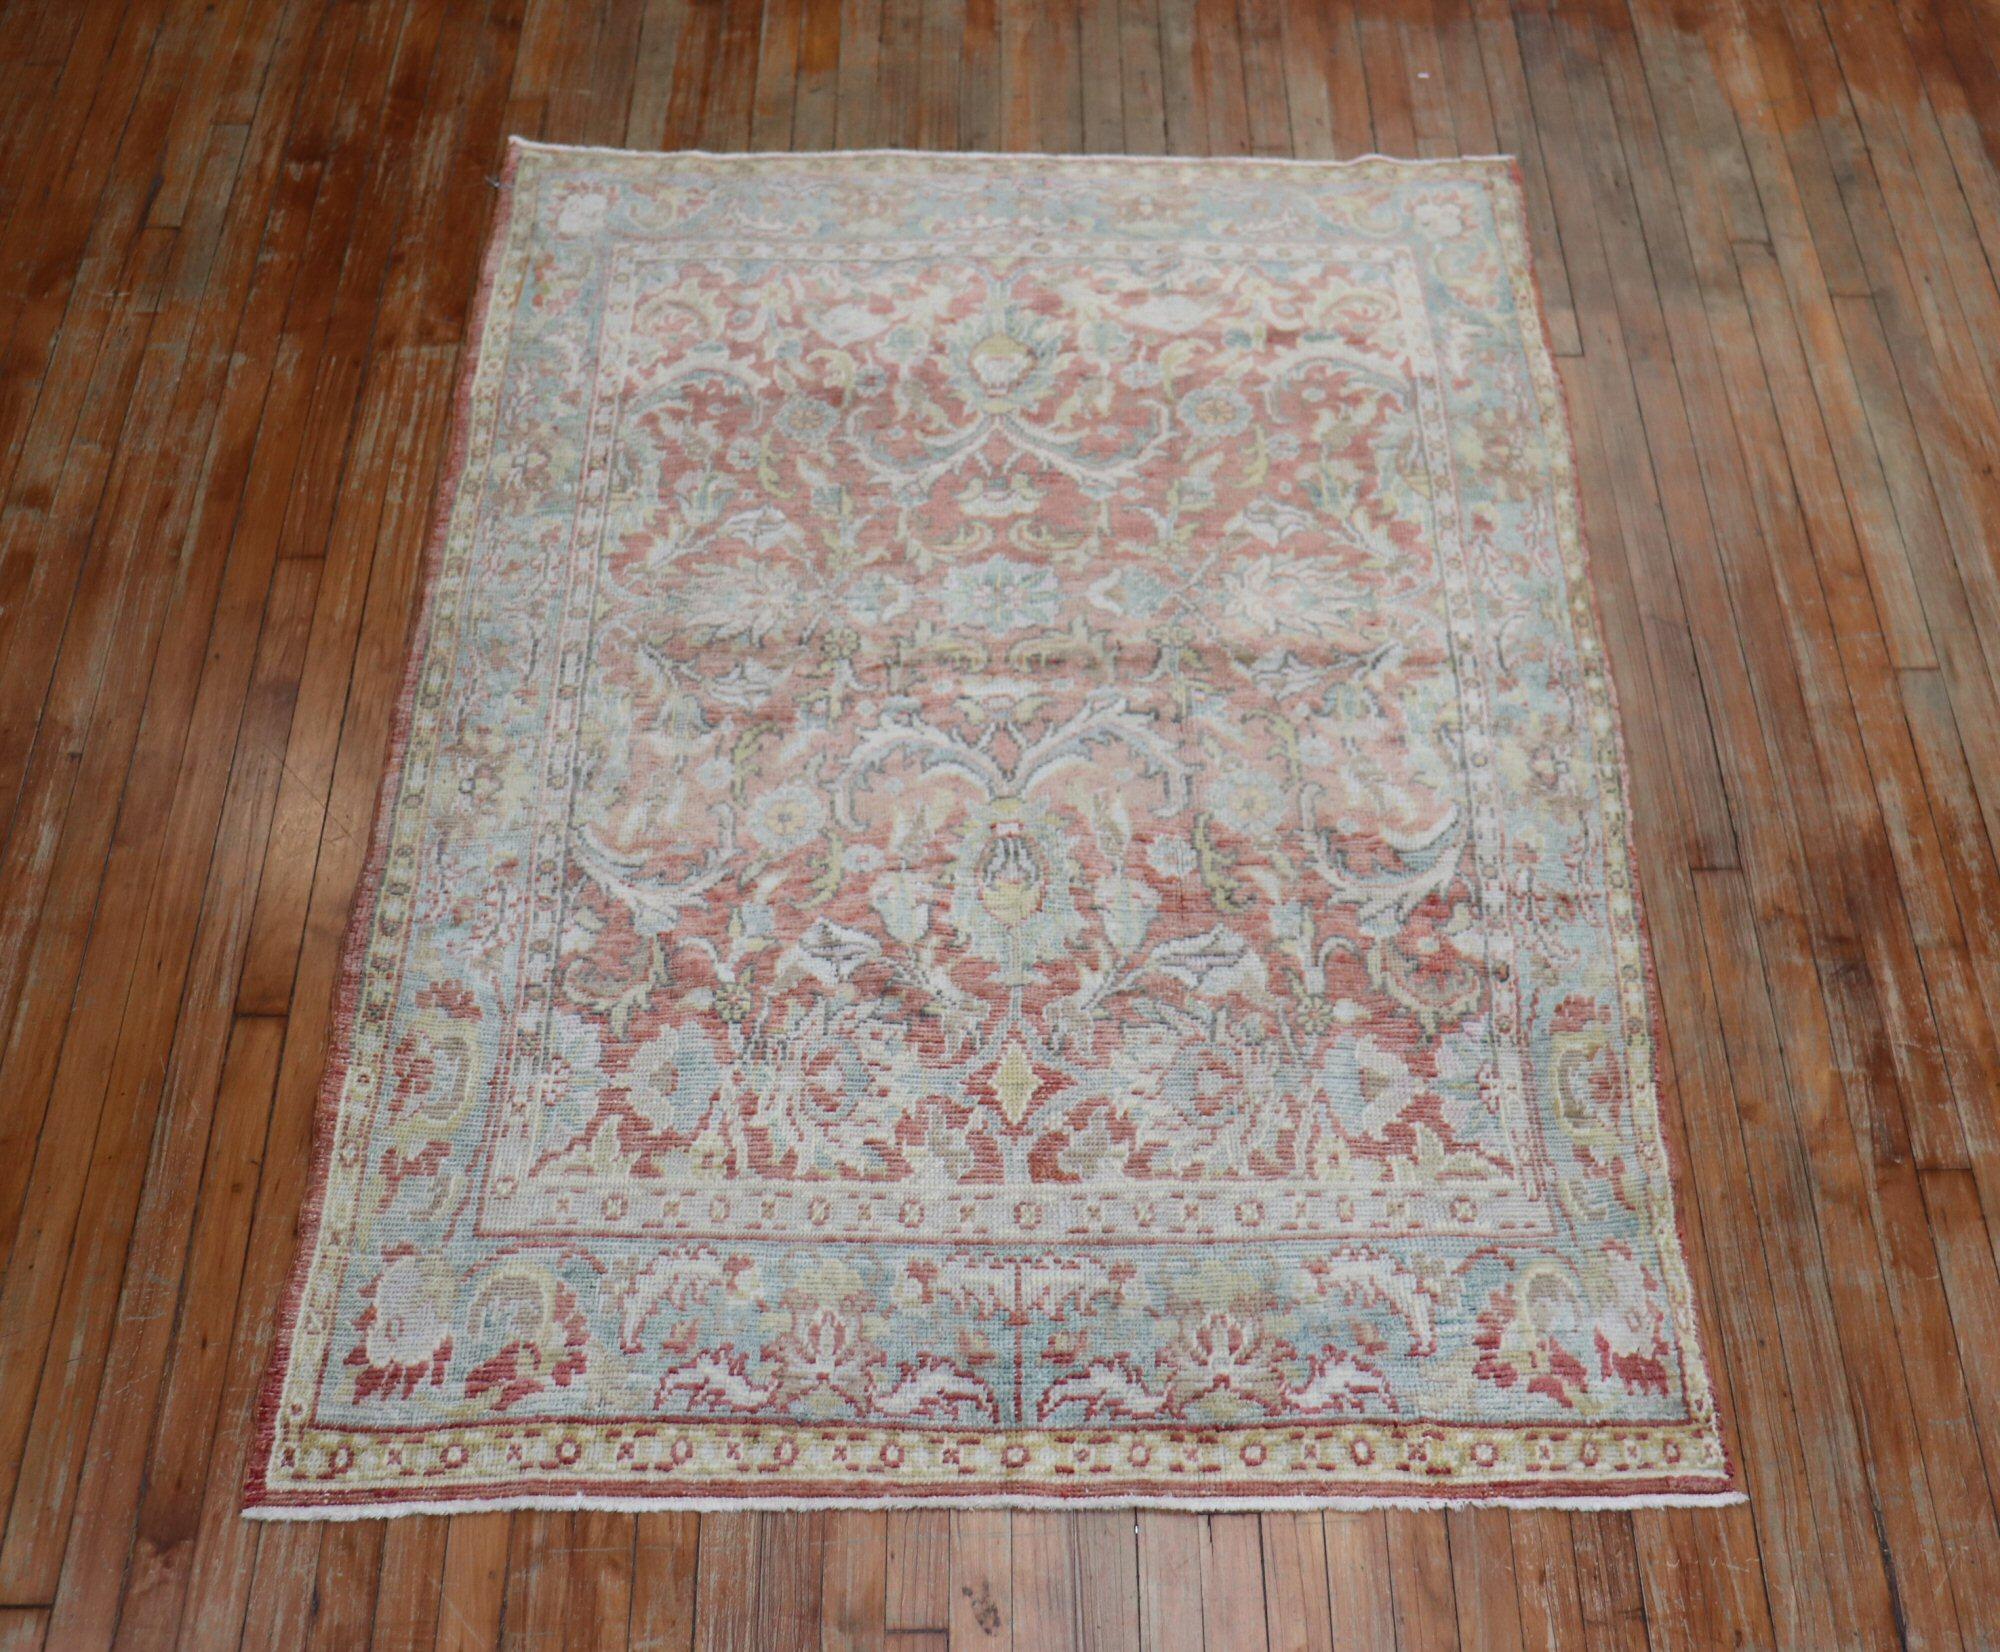 One of a kind decorative vintage Turkish Anatolian rug with a fancy floral all-over design on a muted pink red field.

Measures: 4'8